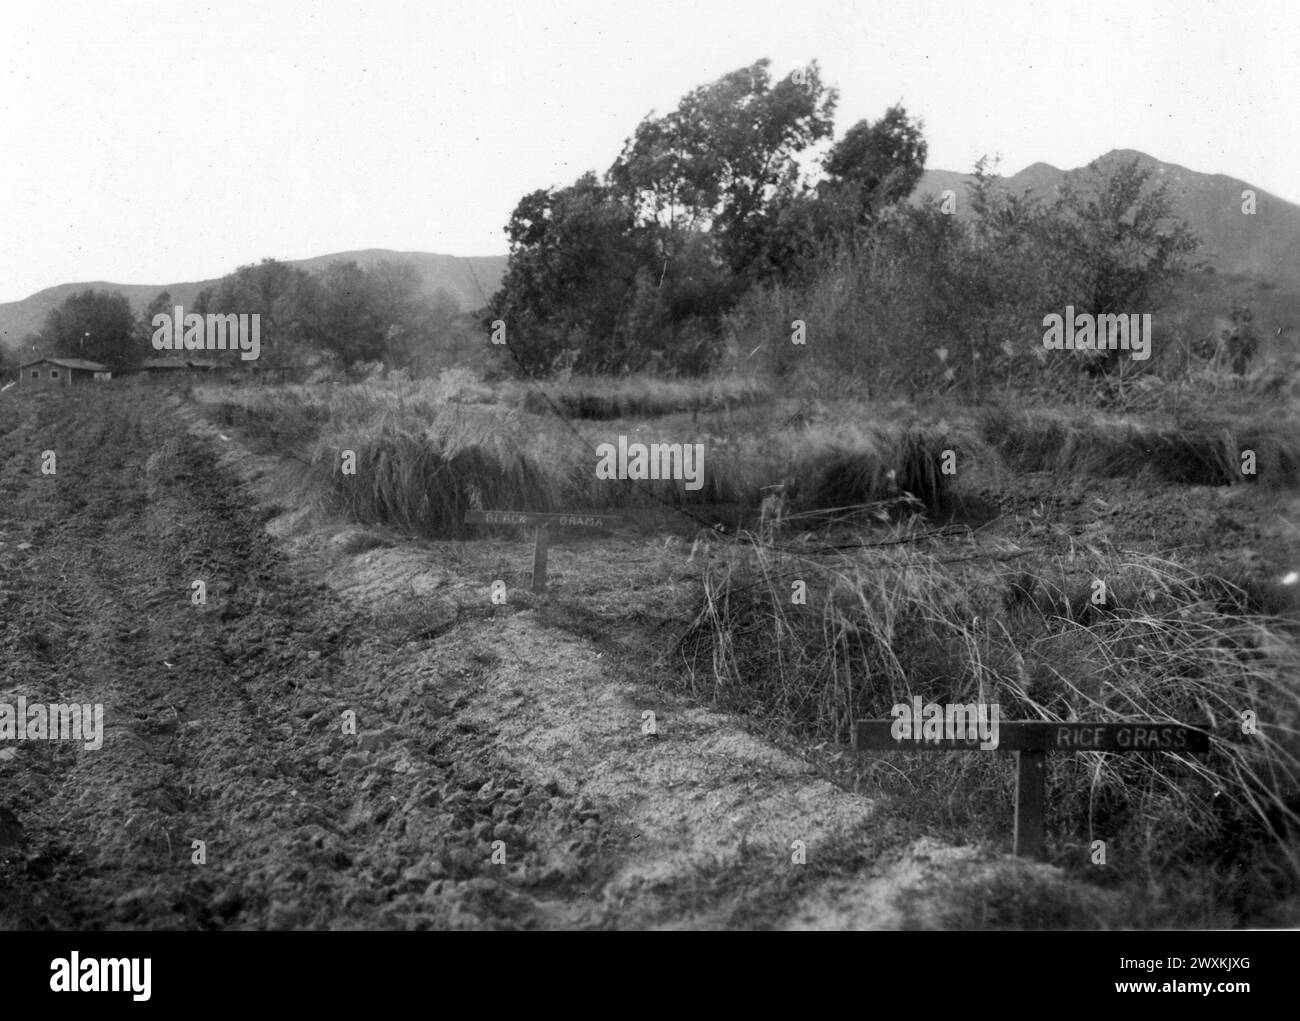 Photograph of Pinyon Ricegrass and Black Grama Grown as Part of the CCC-ID Nursery Project in rural California ca. 1936-1942 Stock Photo